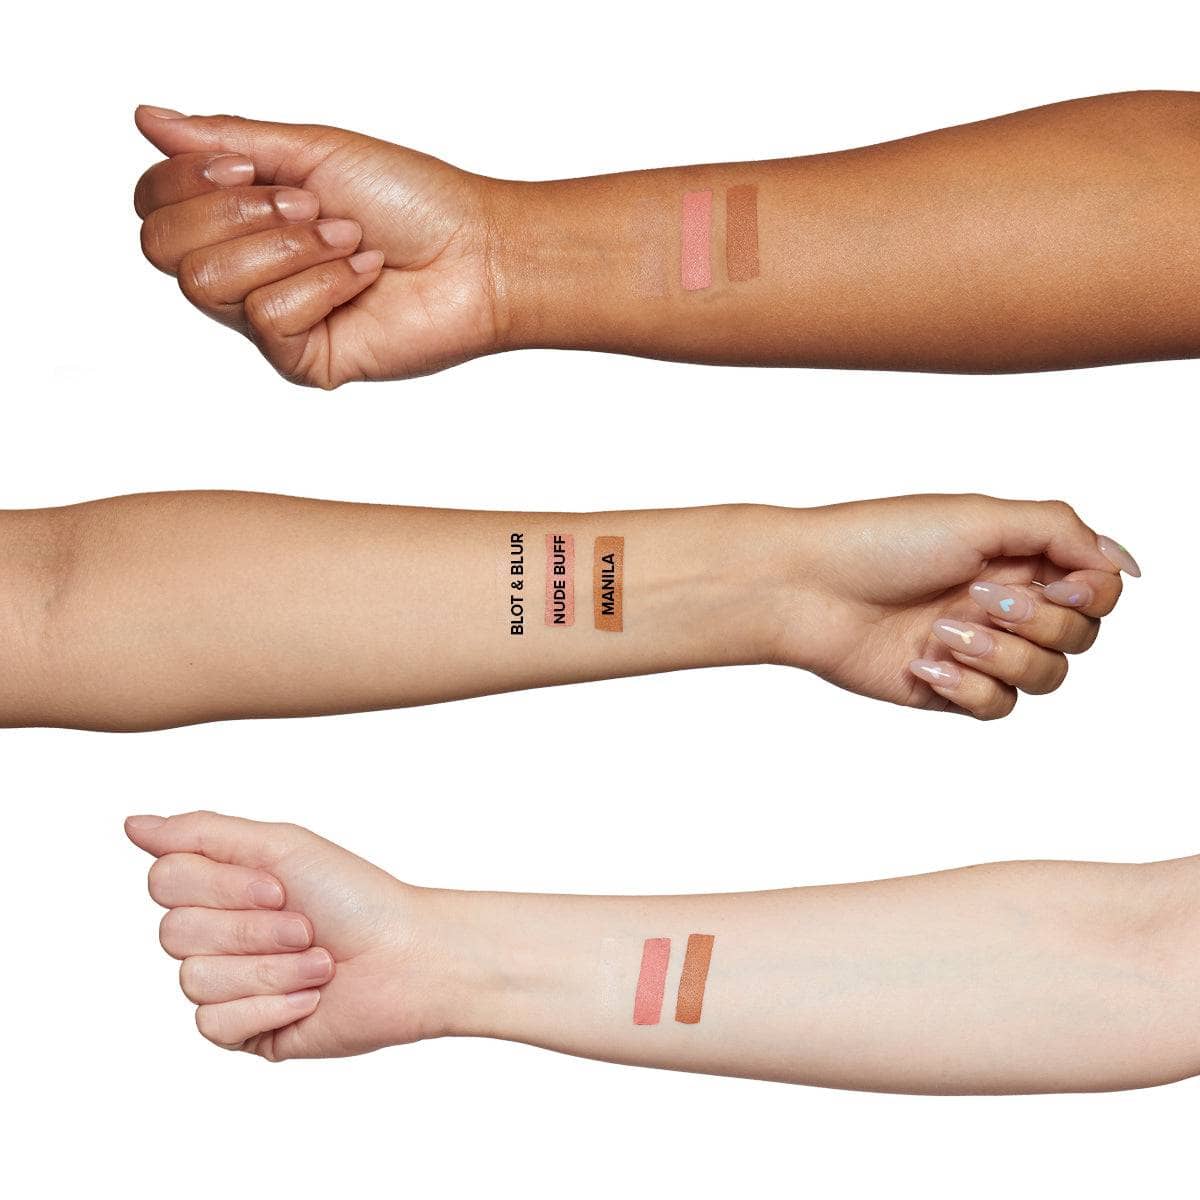 Arms in different skin tones with No Edit, No Filter, Just Glam swatches